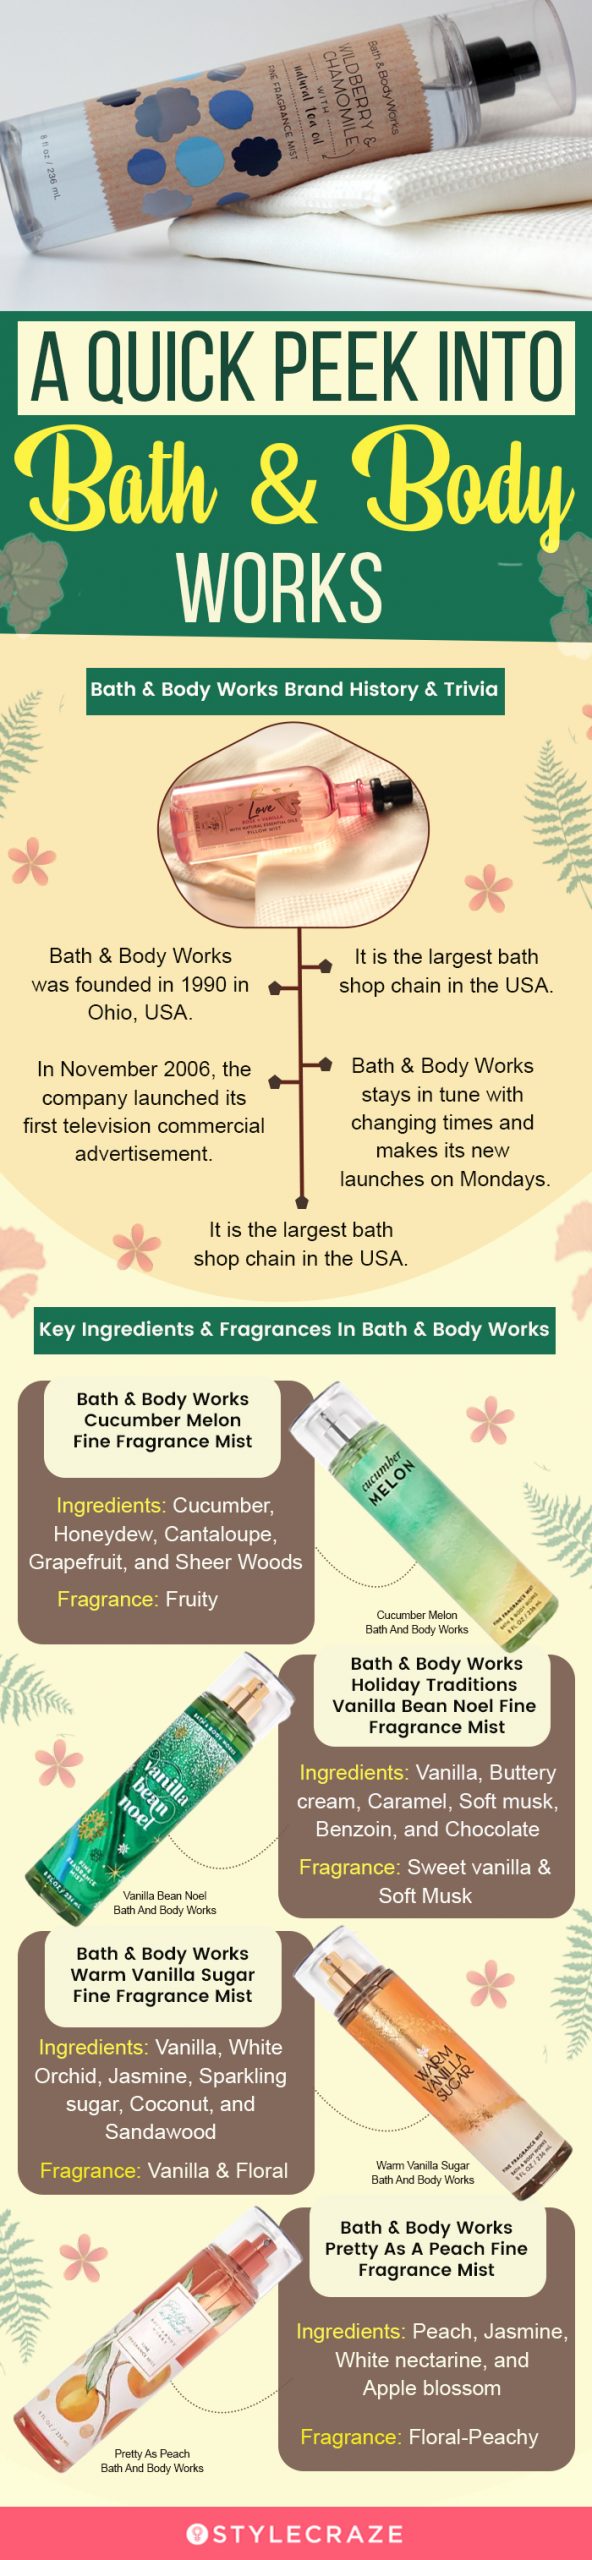 A Quick Peek Into Bath & Body Works (infographic)